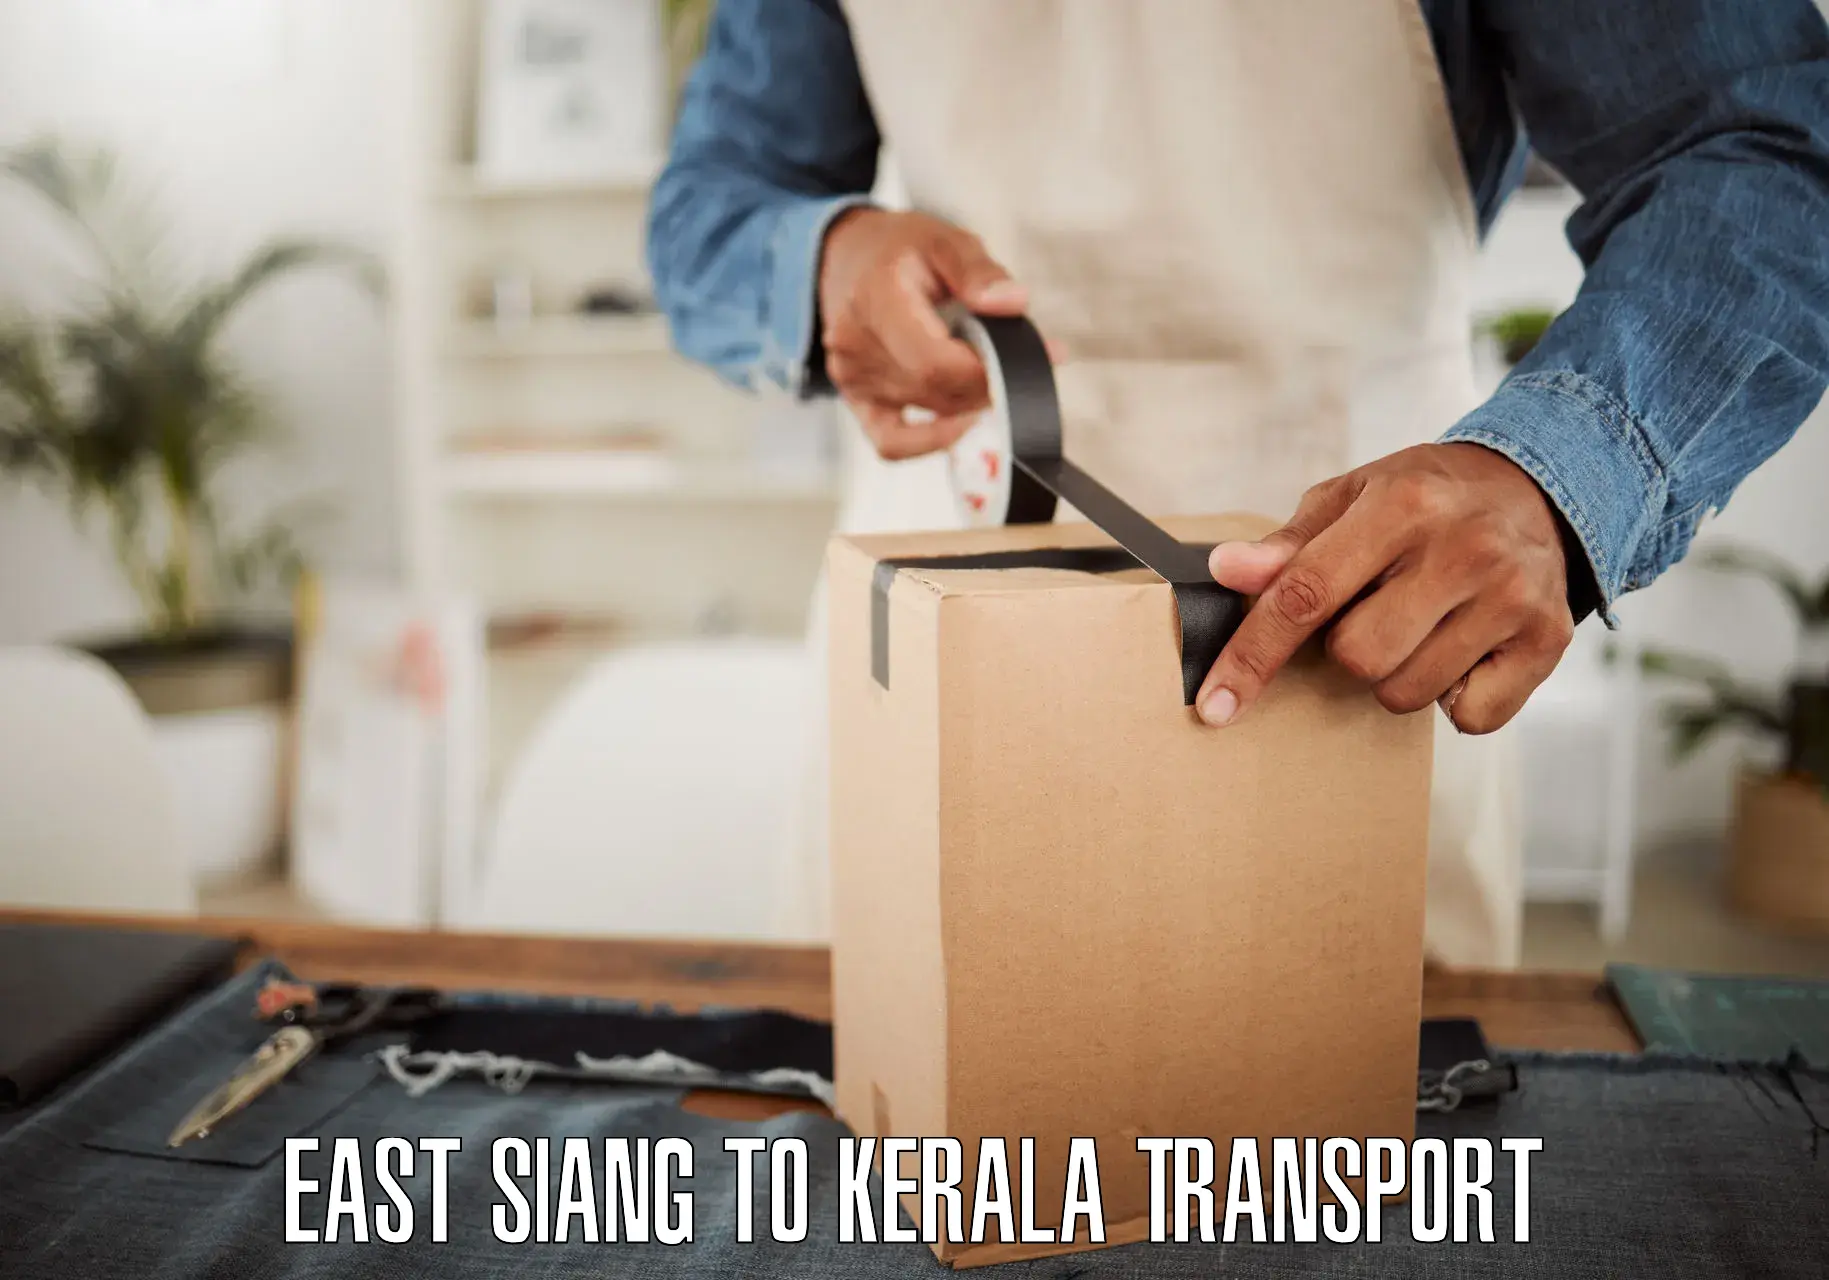 Express transport services East Siang to Kalpetta